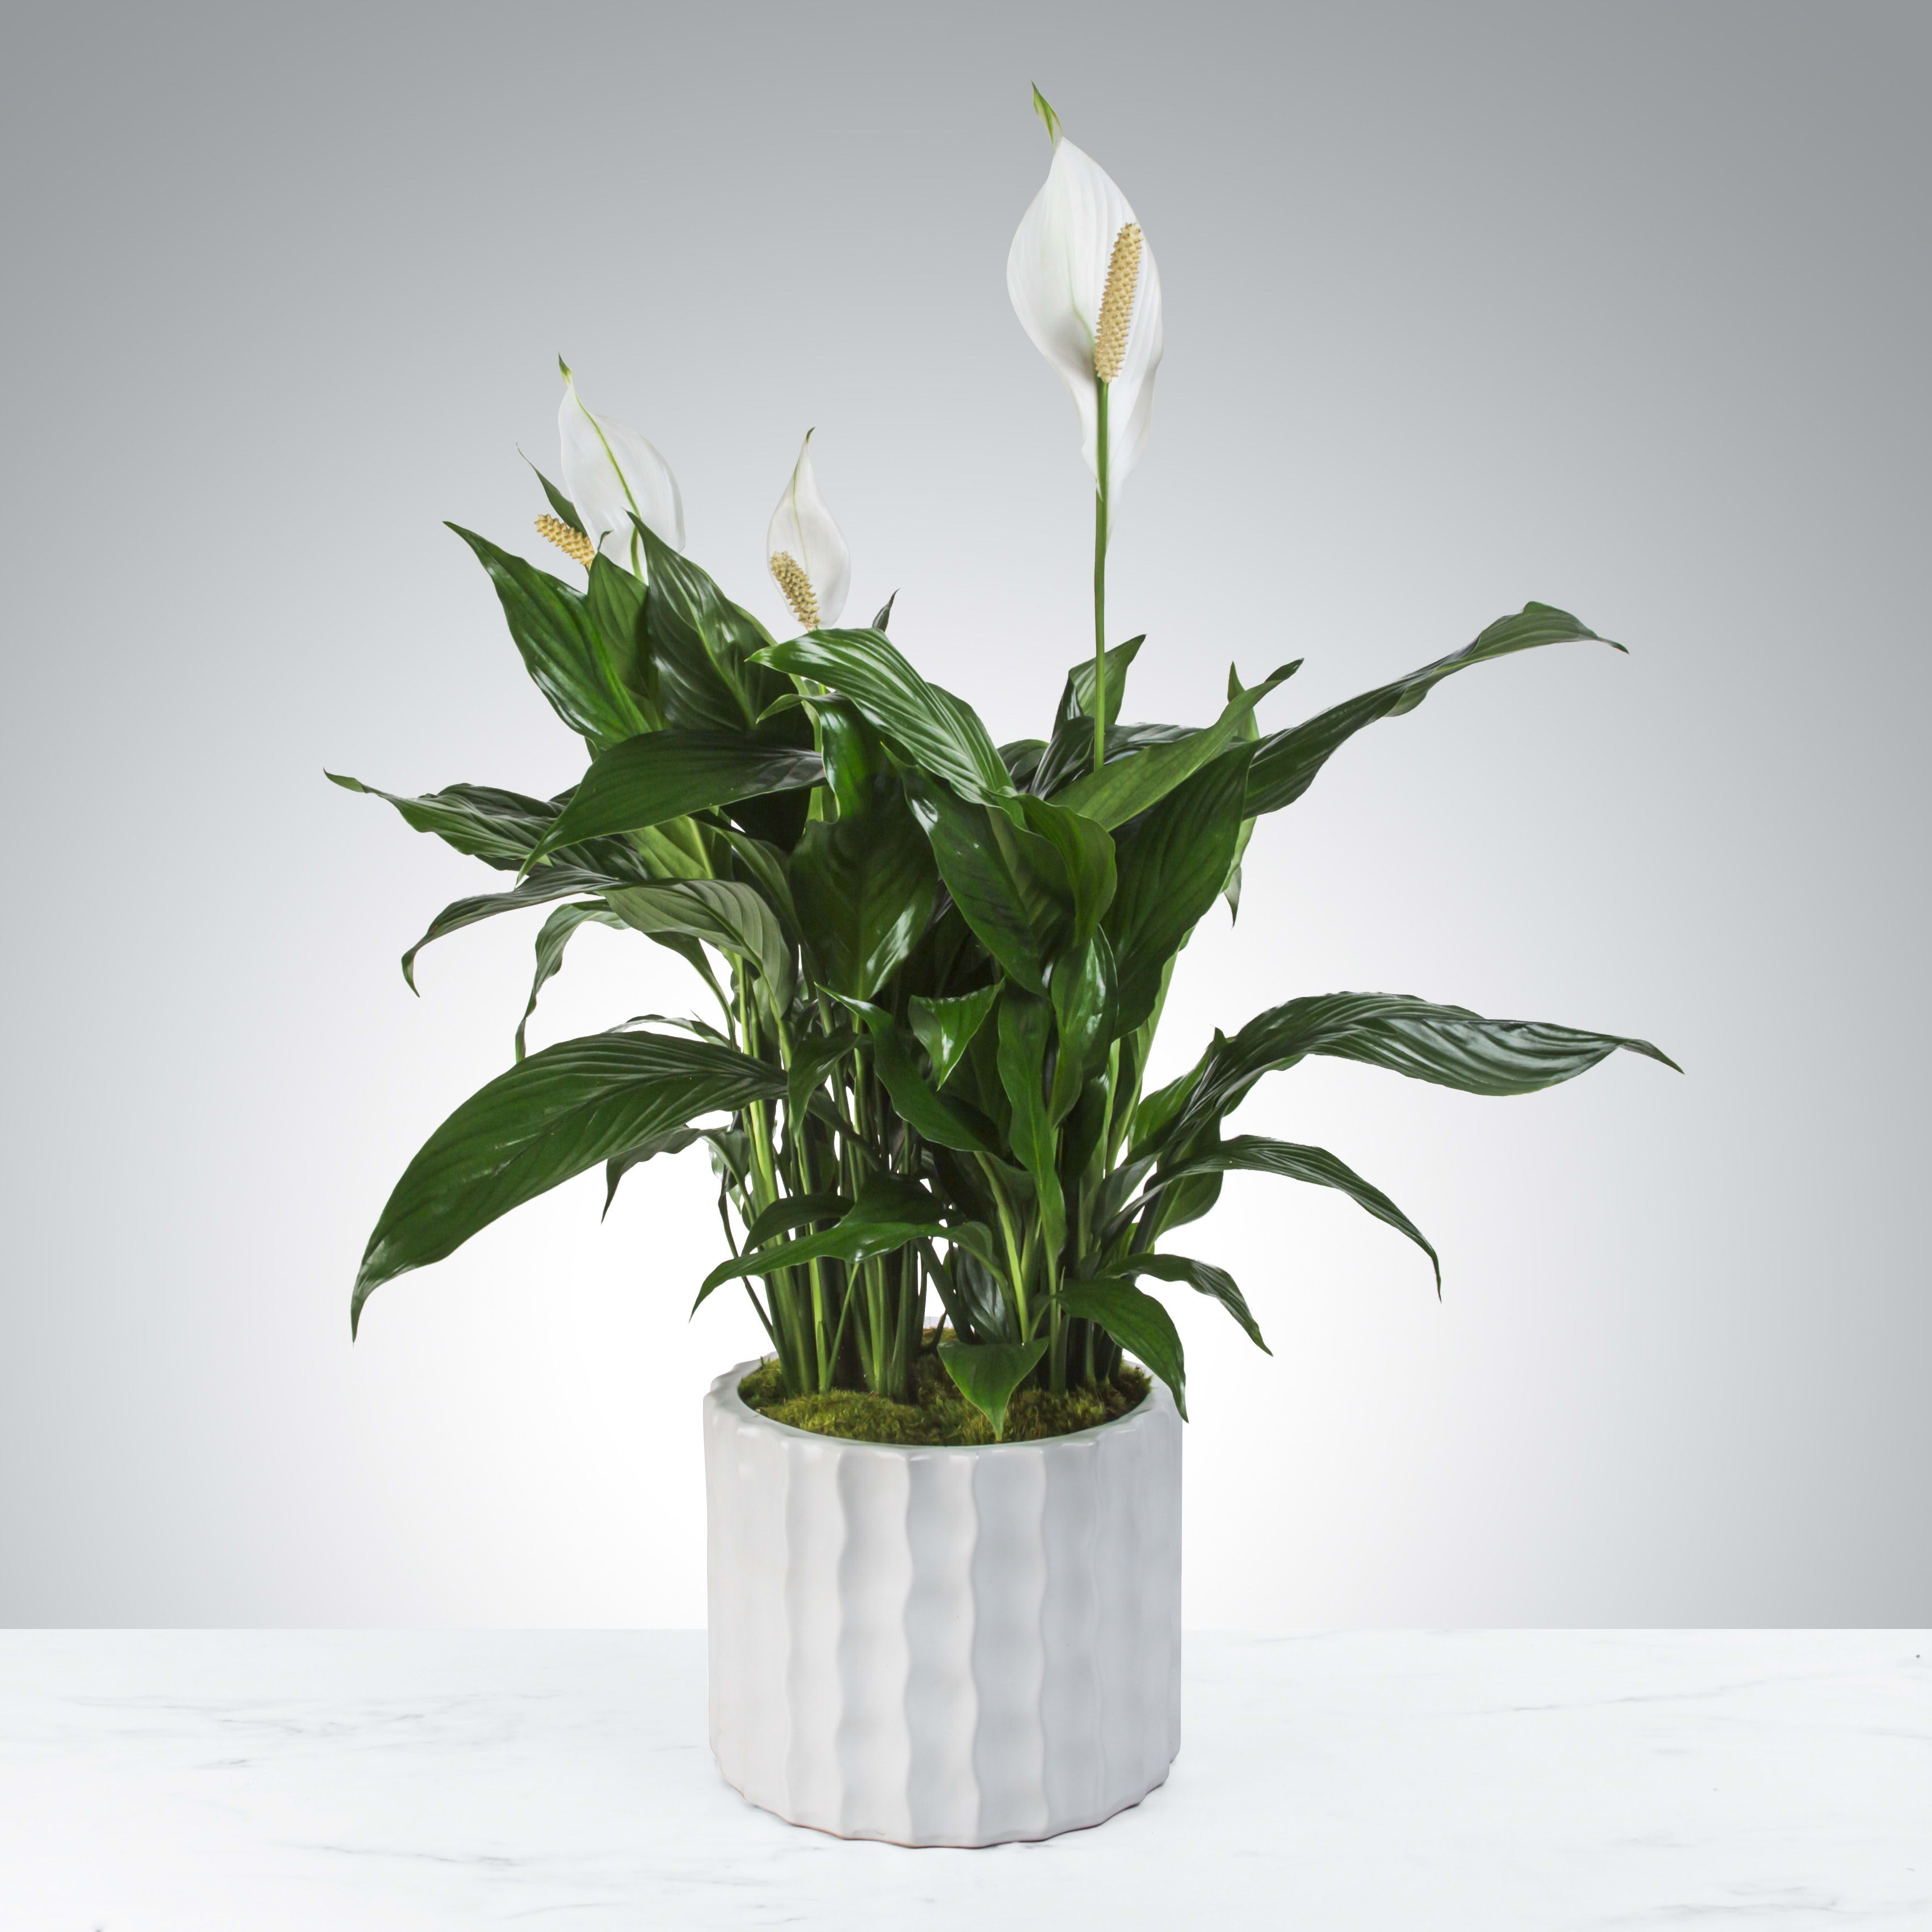 Modern Spathiphyllum Plant by BloomNation™ - A tall reaching spathiphyllum plant, also known as a peace lily, set in a modern planter. Peace Lily's are easy to grow and are known for their air toxin removing properties. Send the gift of greenery!  Overall height is aprox.    17-19 inches tall....